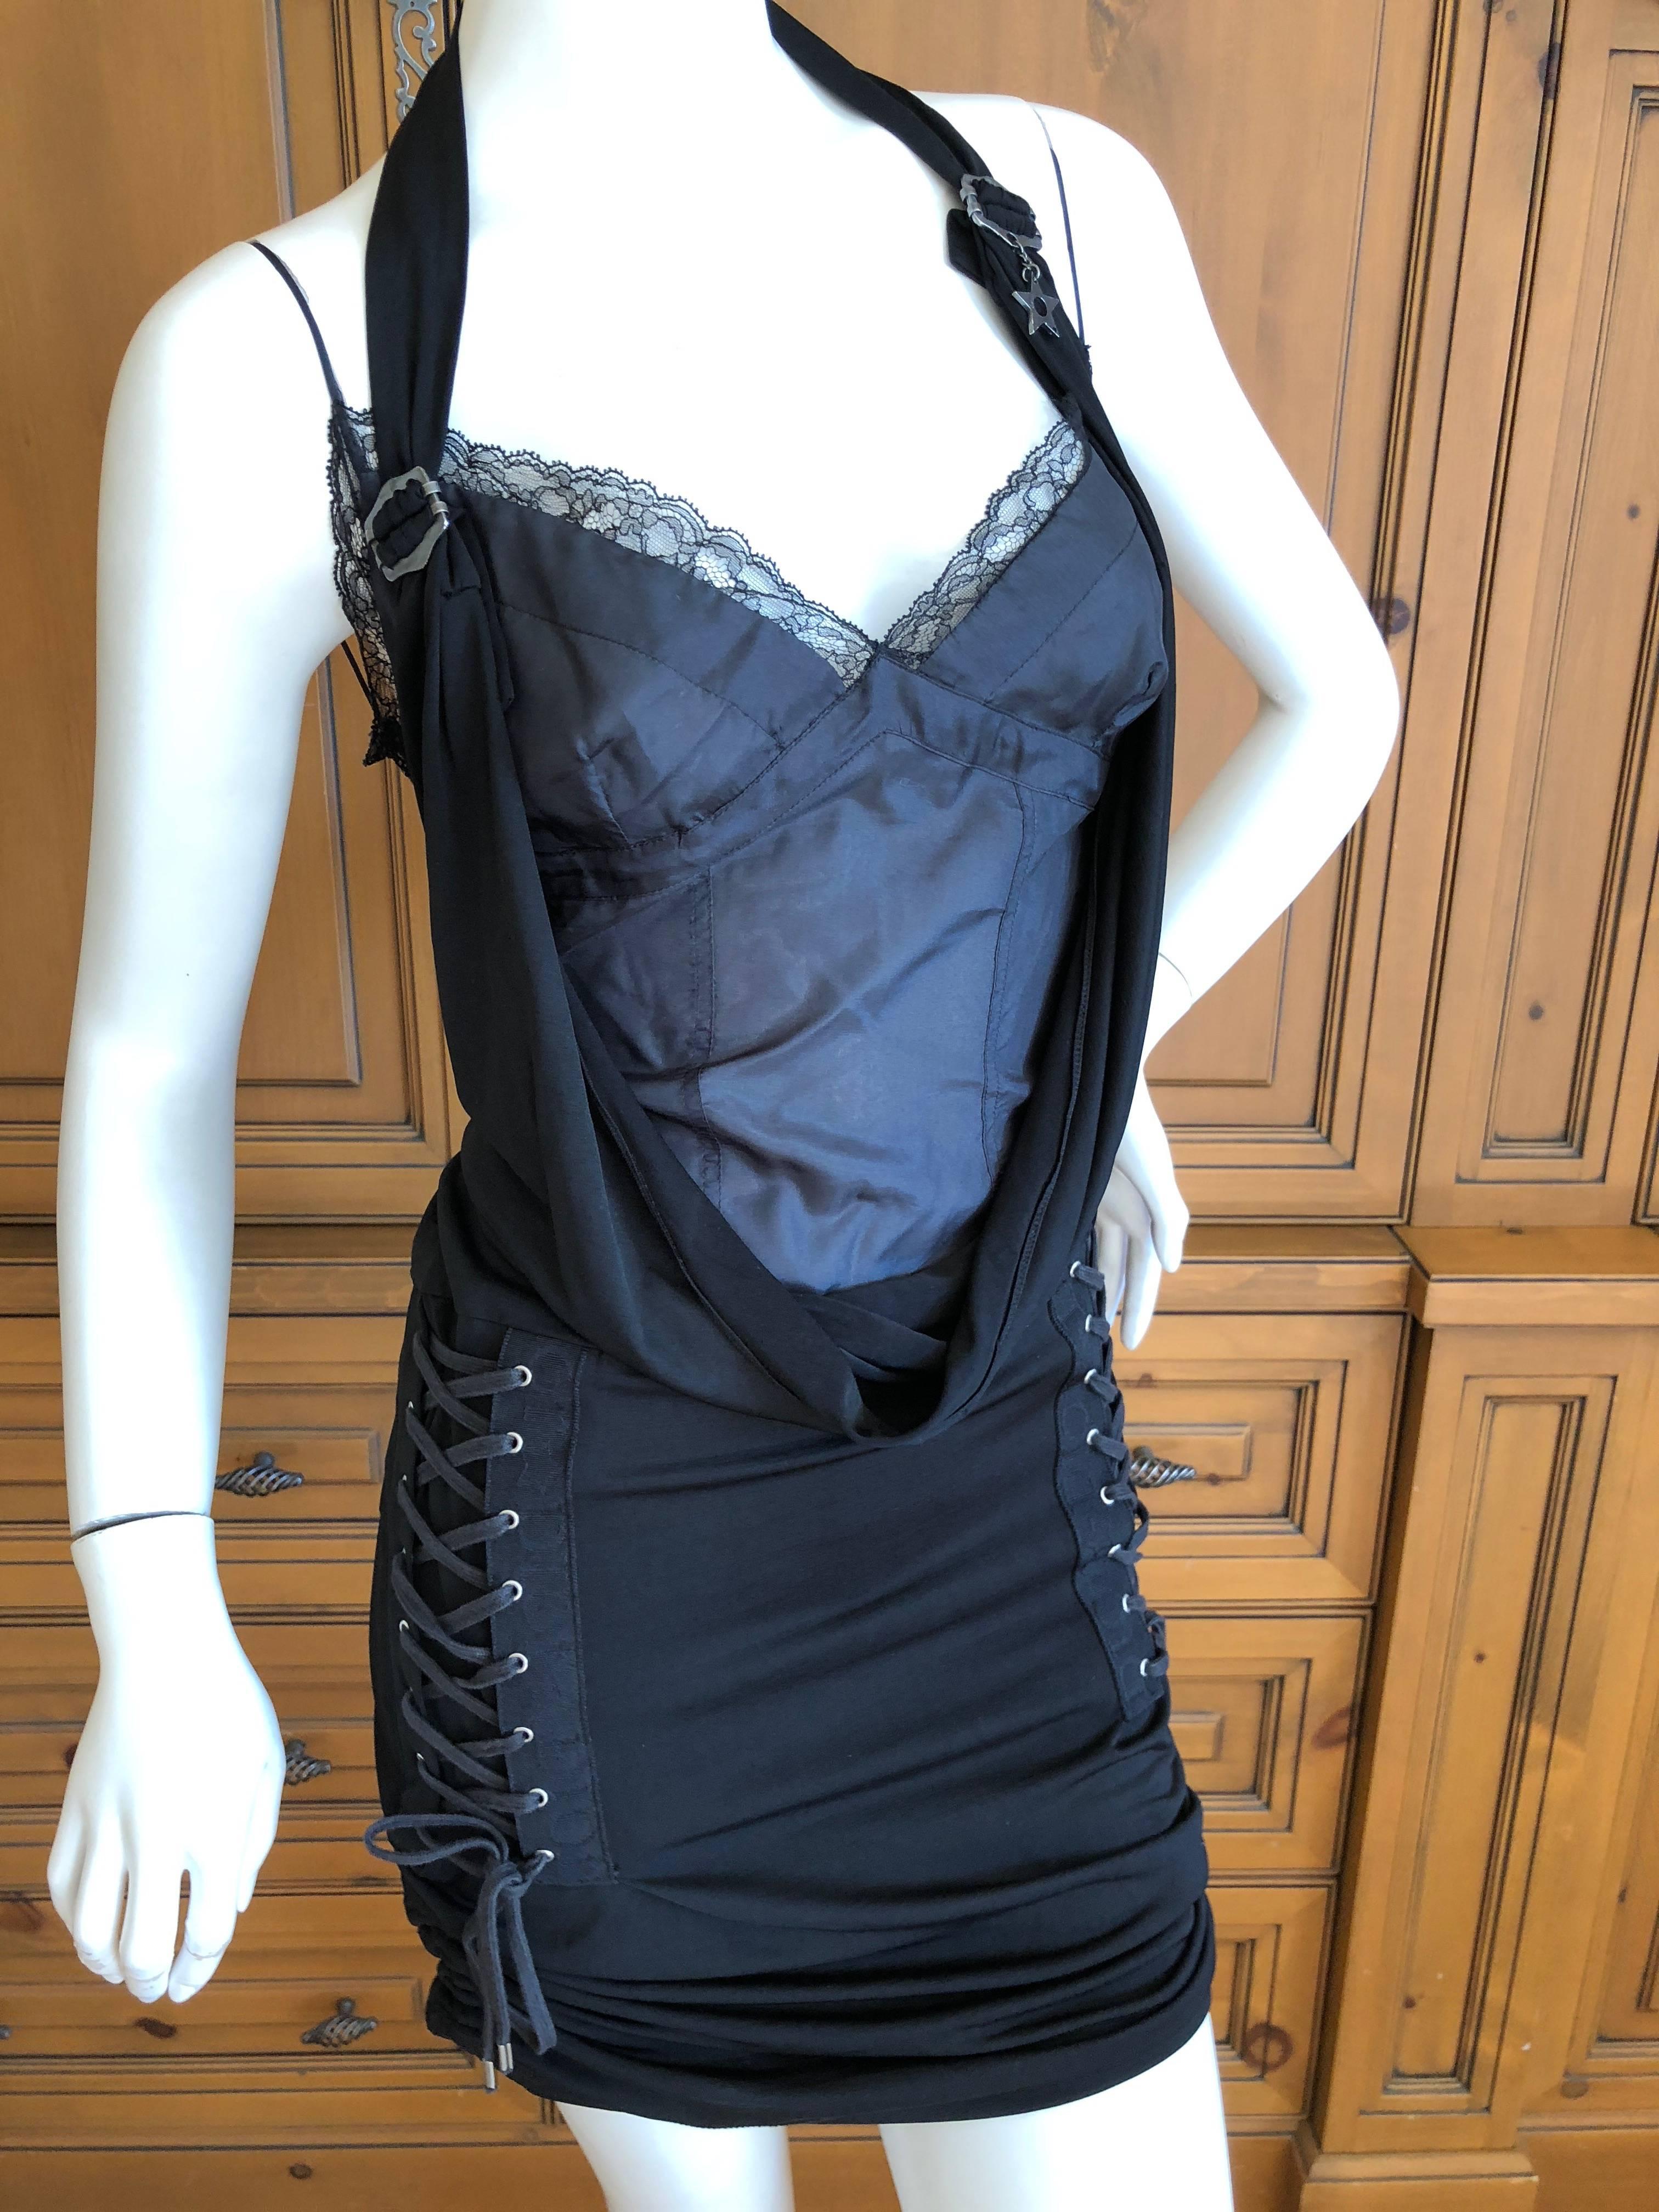 Women's Christian Dior by John Galliano Lingerie Inspired Corset Laced Cocktail Dress